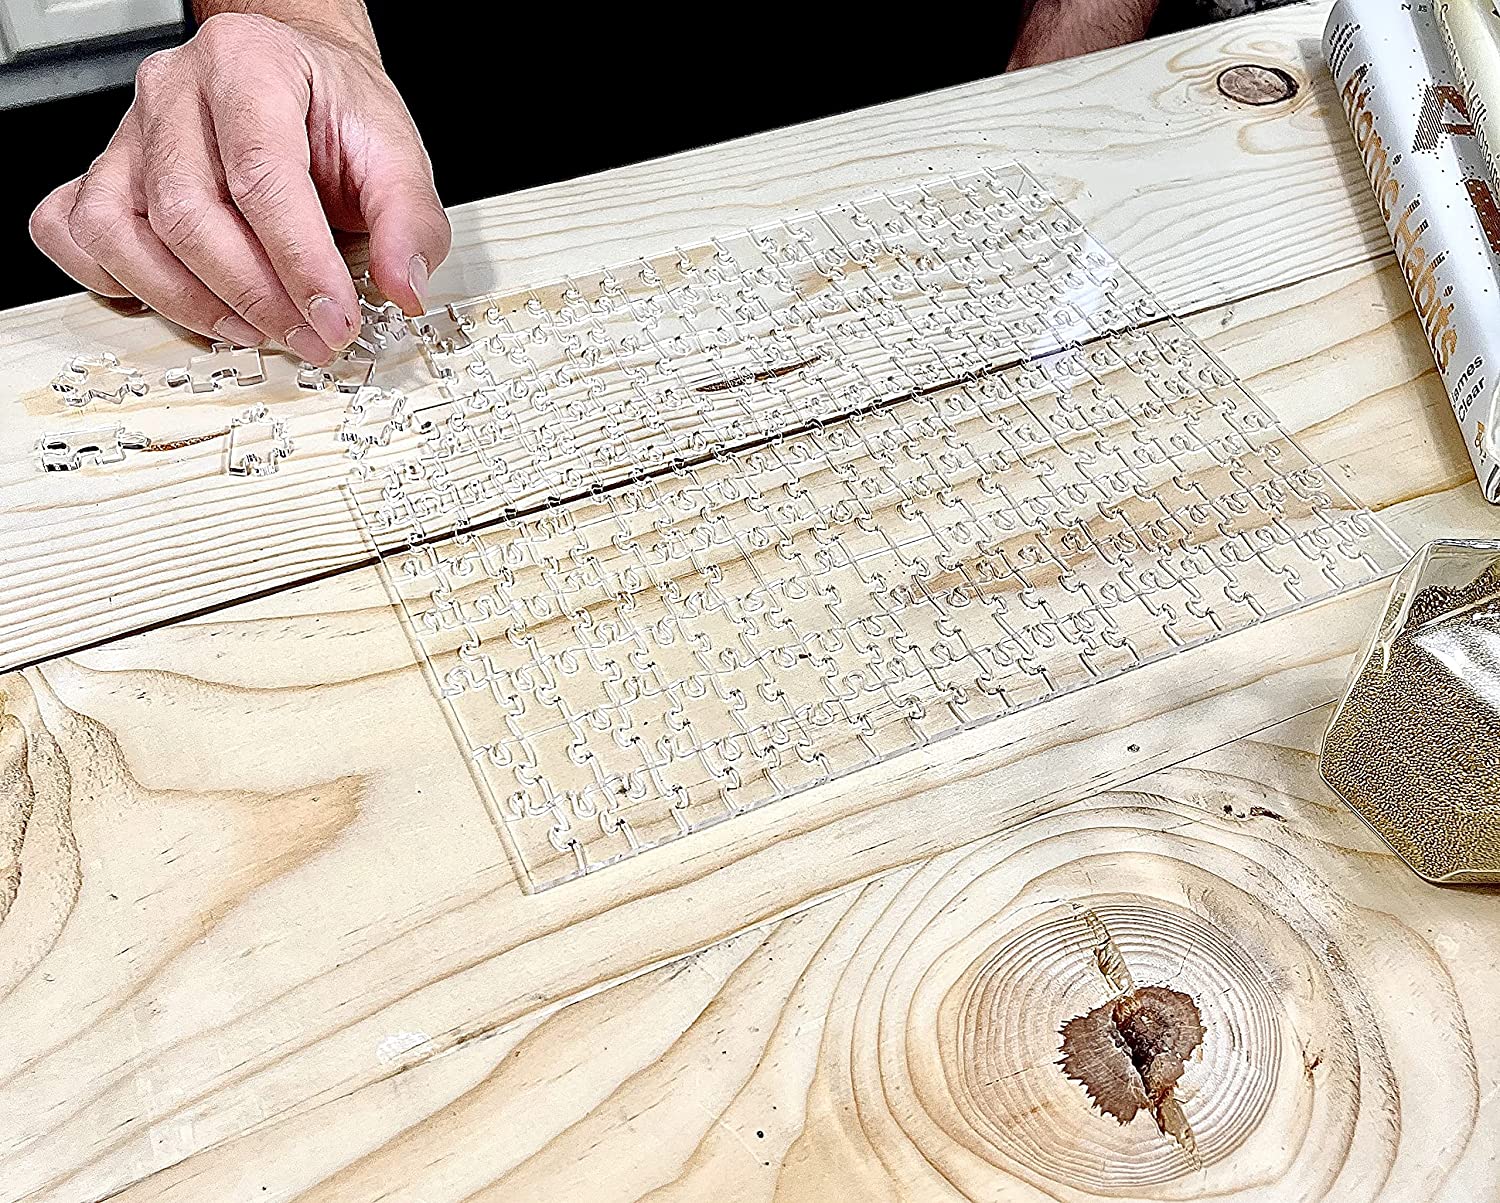 A person is sitting at a desk trying to put together a clear jigsaw puzzle on a wooden table.